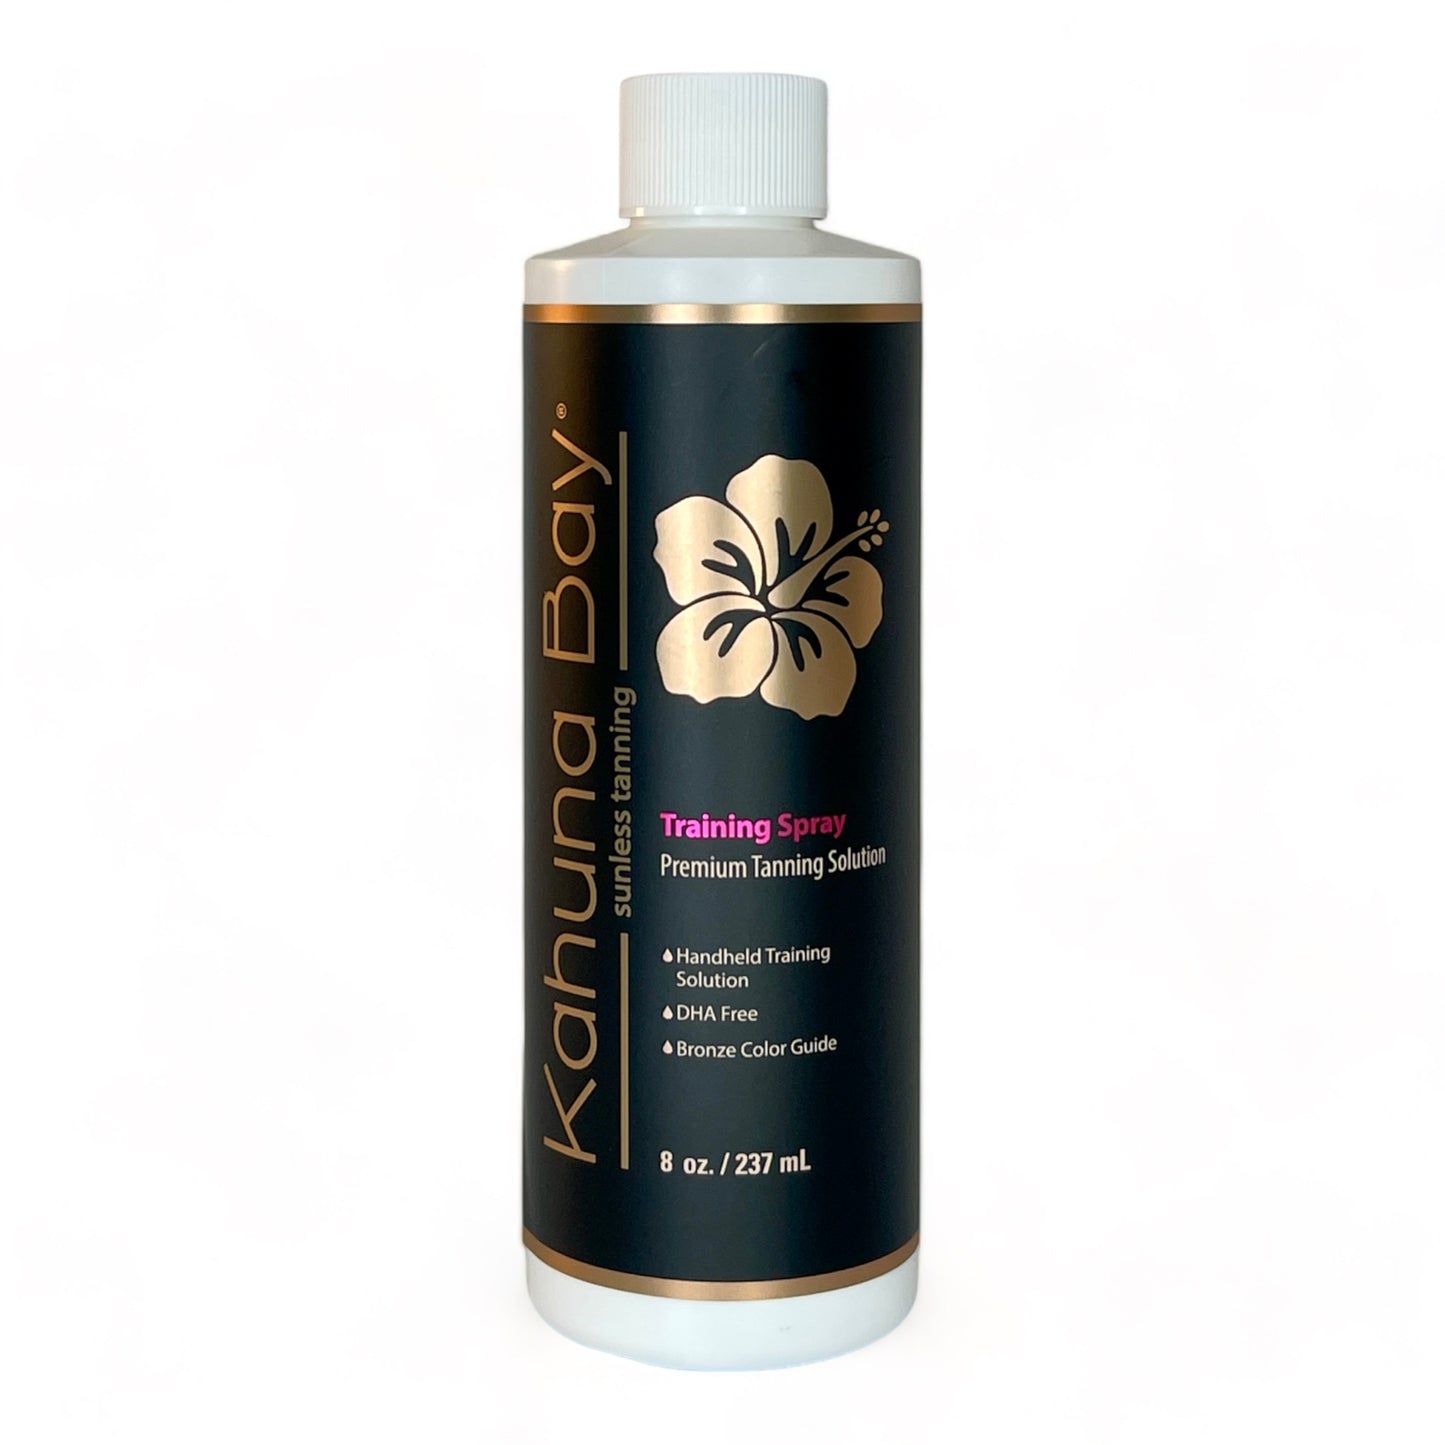 Kahuna Bay Spray Tan Training Solution, Perfect solution to Practice you Technique!